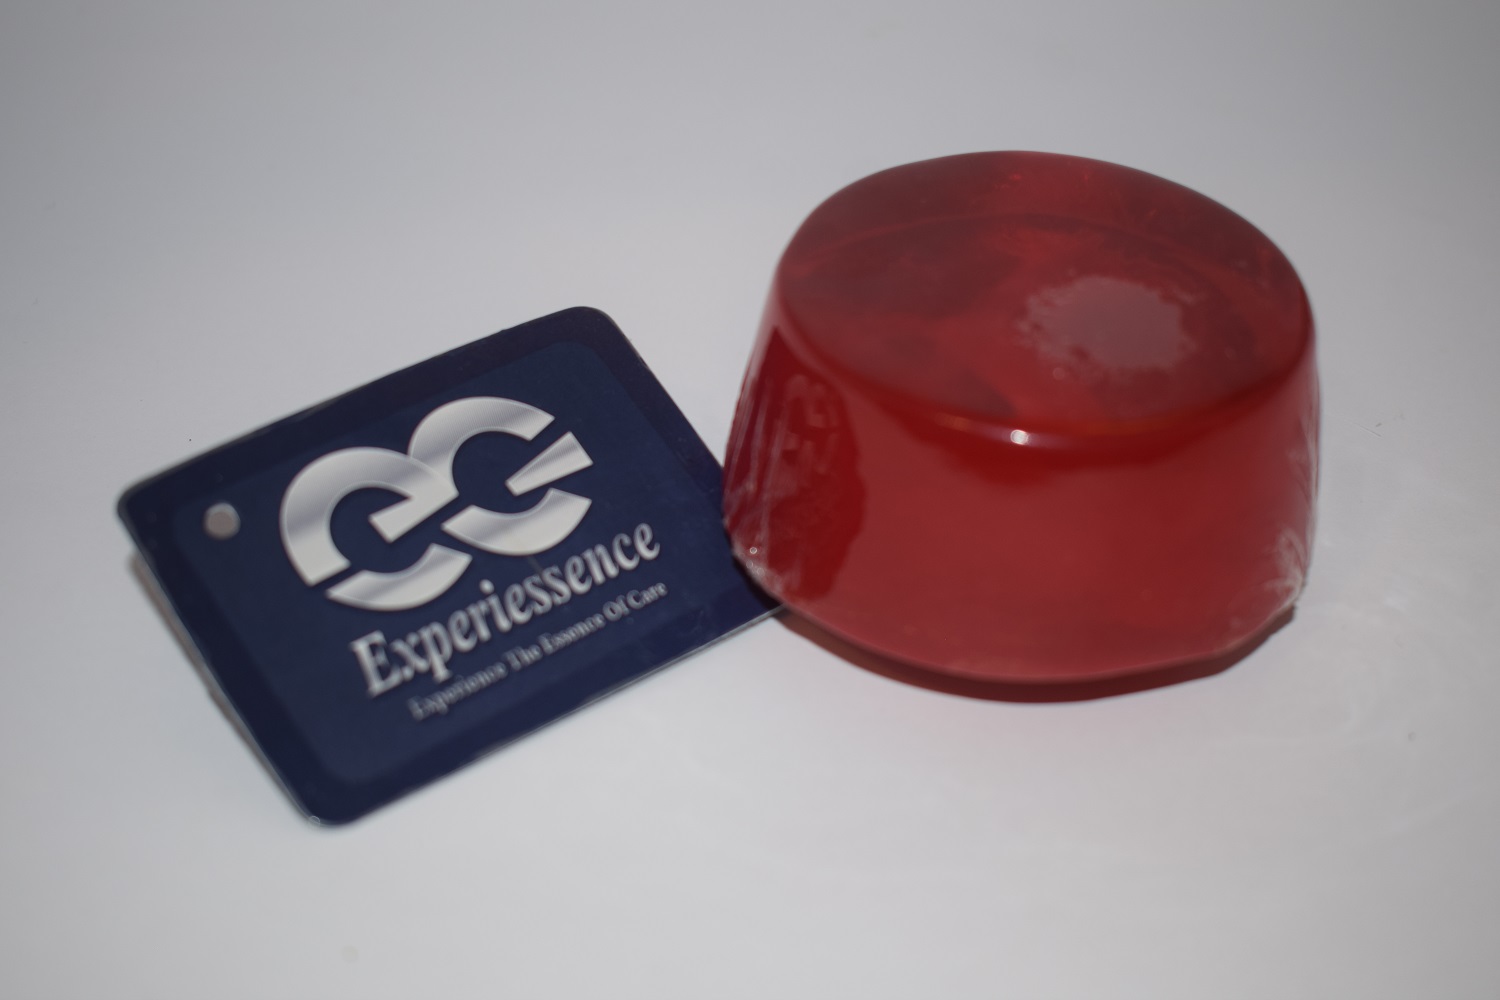 Experiessence Feel Happiness (Aroma Therapy) Soap (FOR PLEASANT MOODS, REDUCES GLOOMY & DEPRESSIVE EMOTIONS)